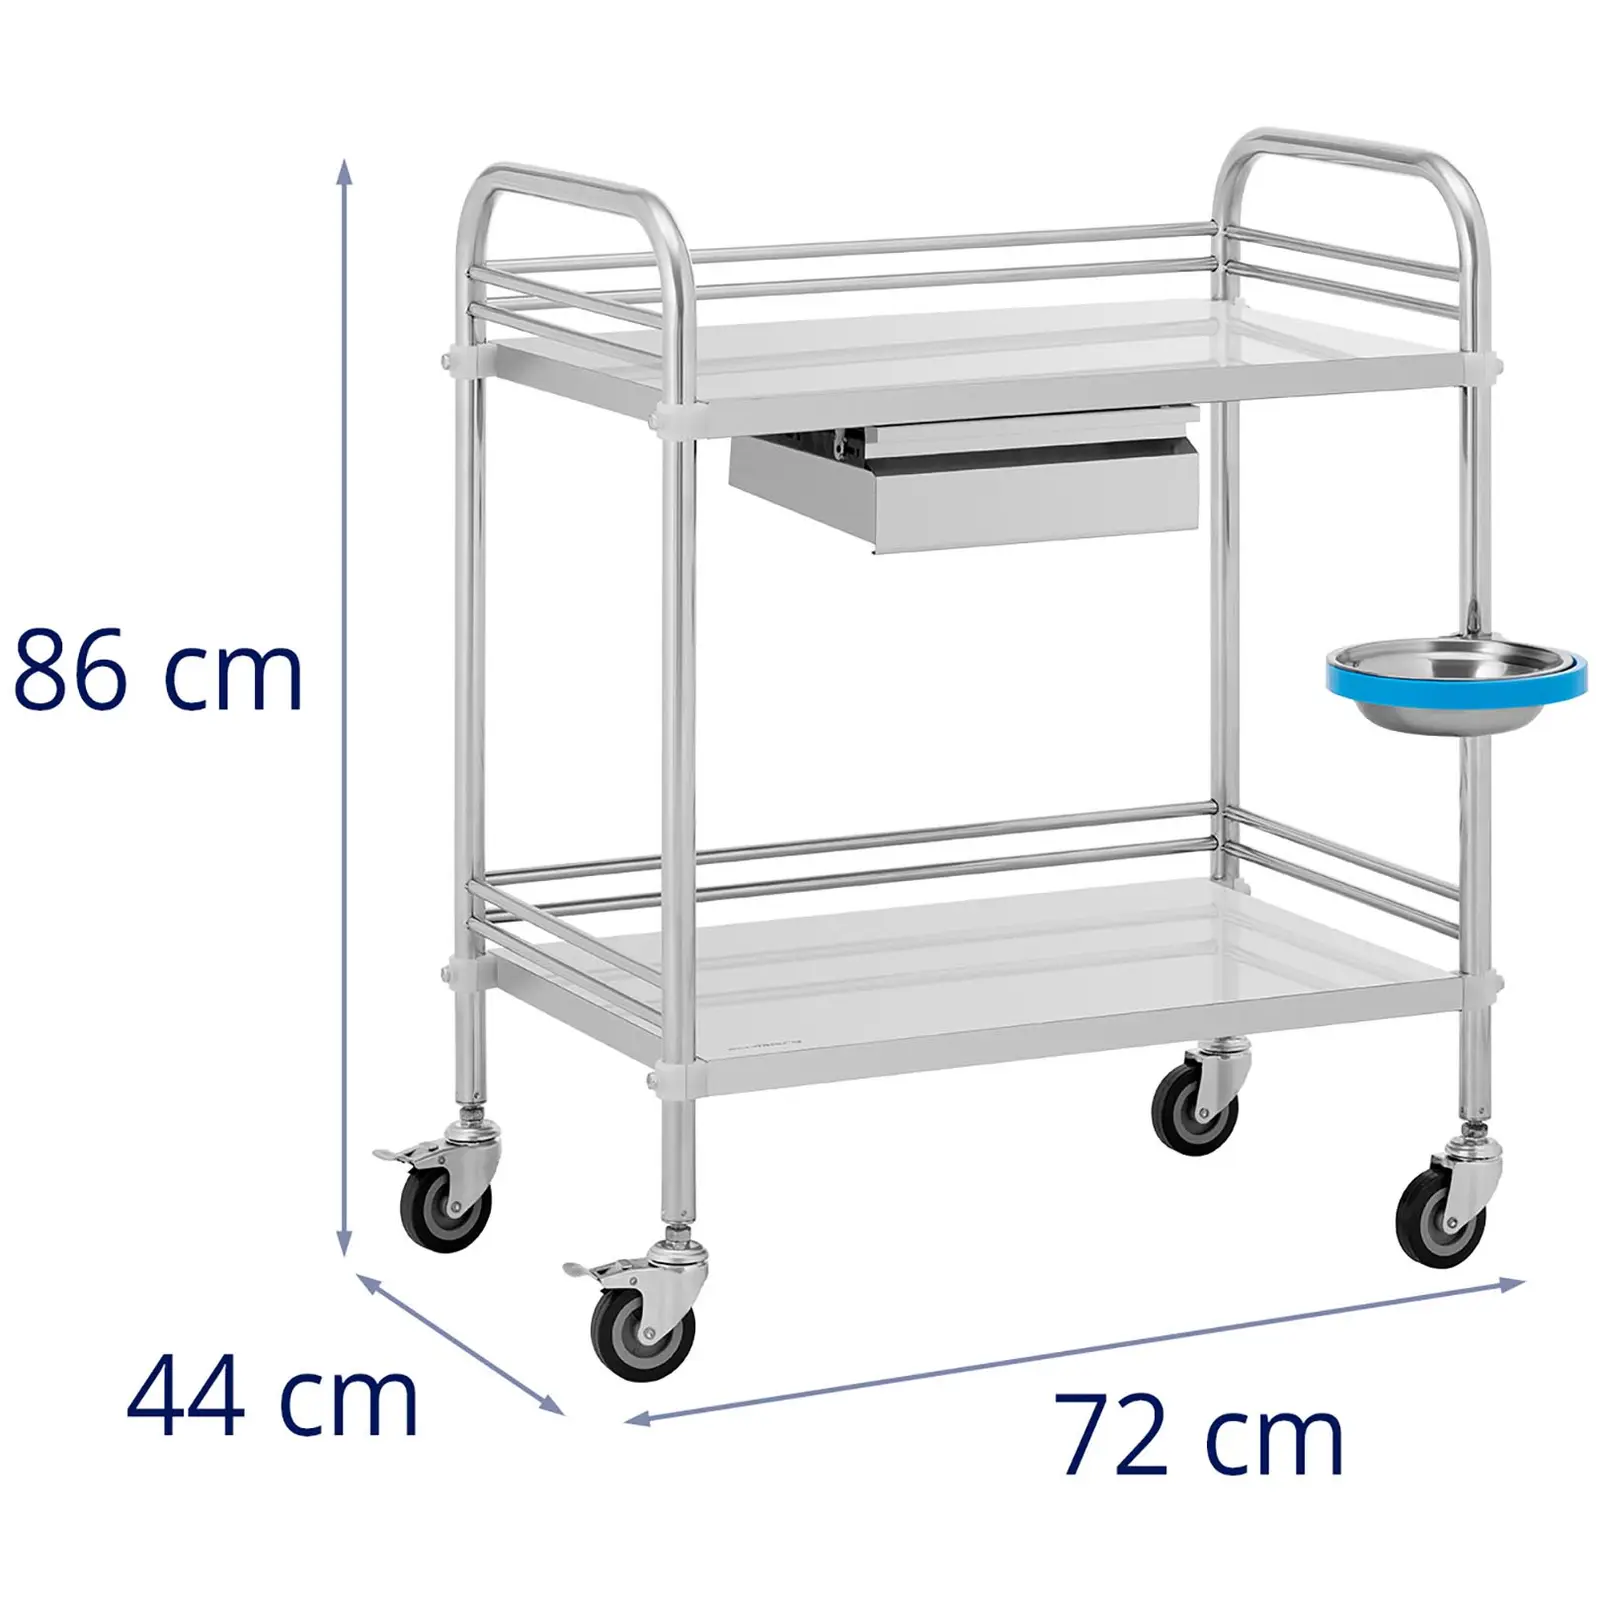 Factory second Laboratory Trolley - stainless steel - 2 shelves each 63 x 40 x 12.5 cm - 1 drawer - 20 kg